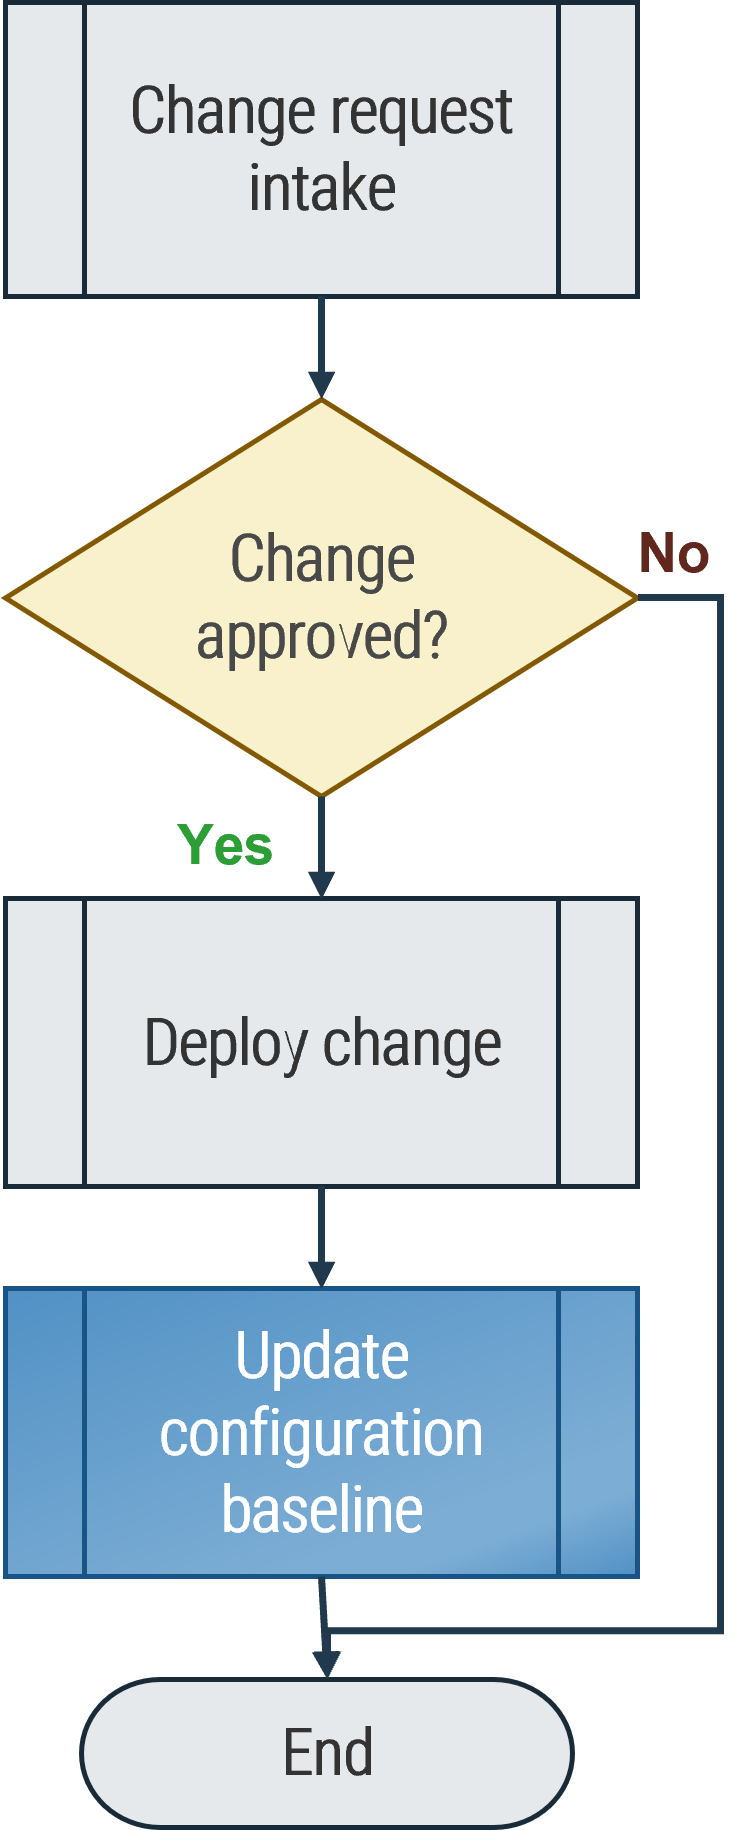 A decision tree for deploying requested changes.